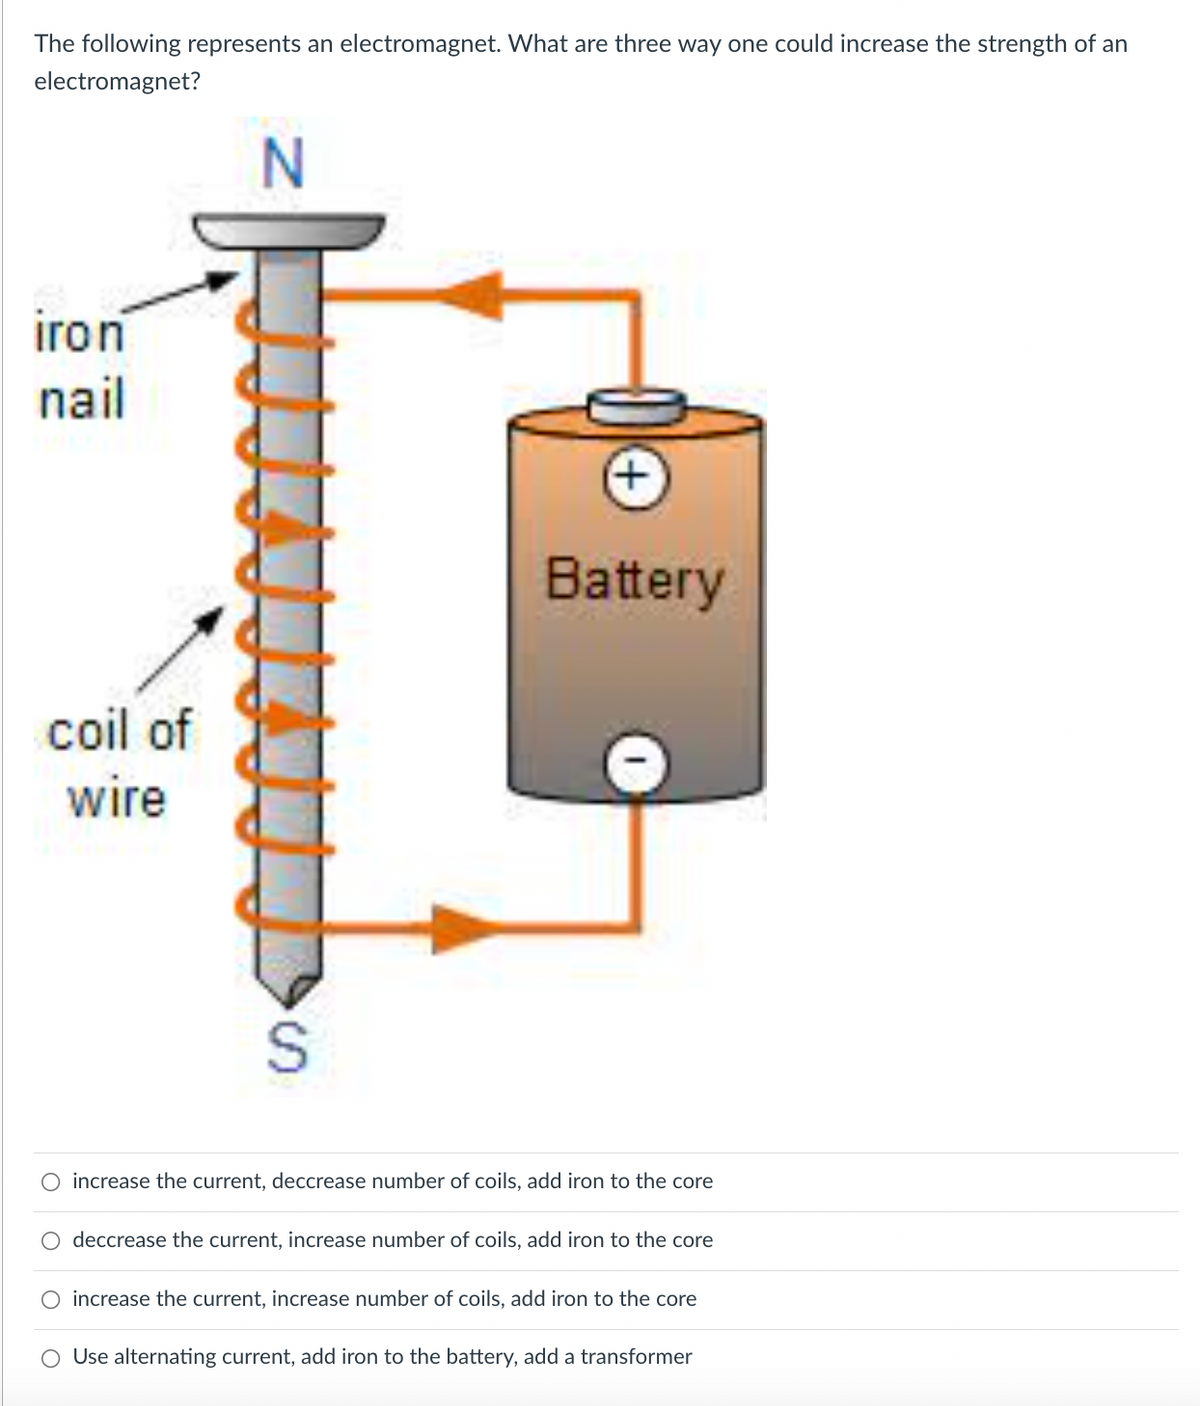 The following represents an electromagnet. What are three way one could increase the strength of an
electromagnet?
iron
nail
Battery
coil
wire
coil of
increase the current, deccrease number of coils, add iron to the core
O deccrease the current, increase number of coils, add iron to the core
O increase the current, increase number of coils, add iron to the core
O Use alternating current, add iron to the battery, add a transformer
